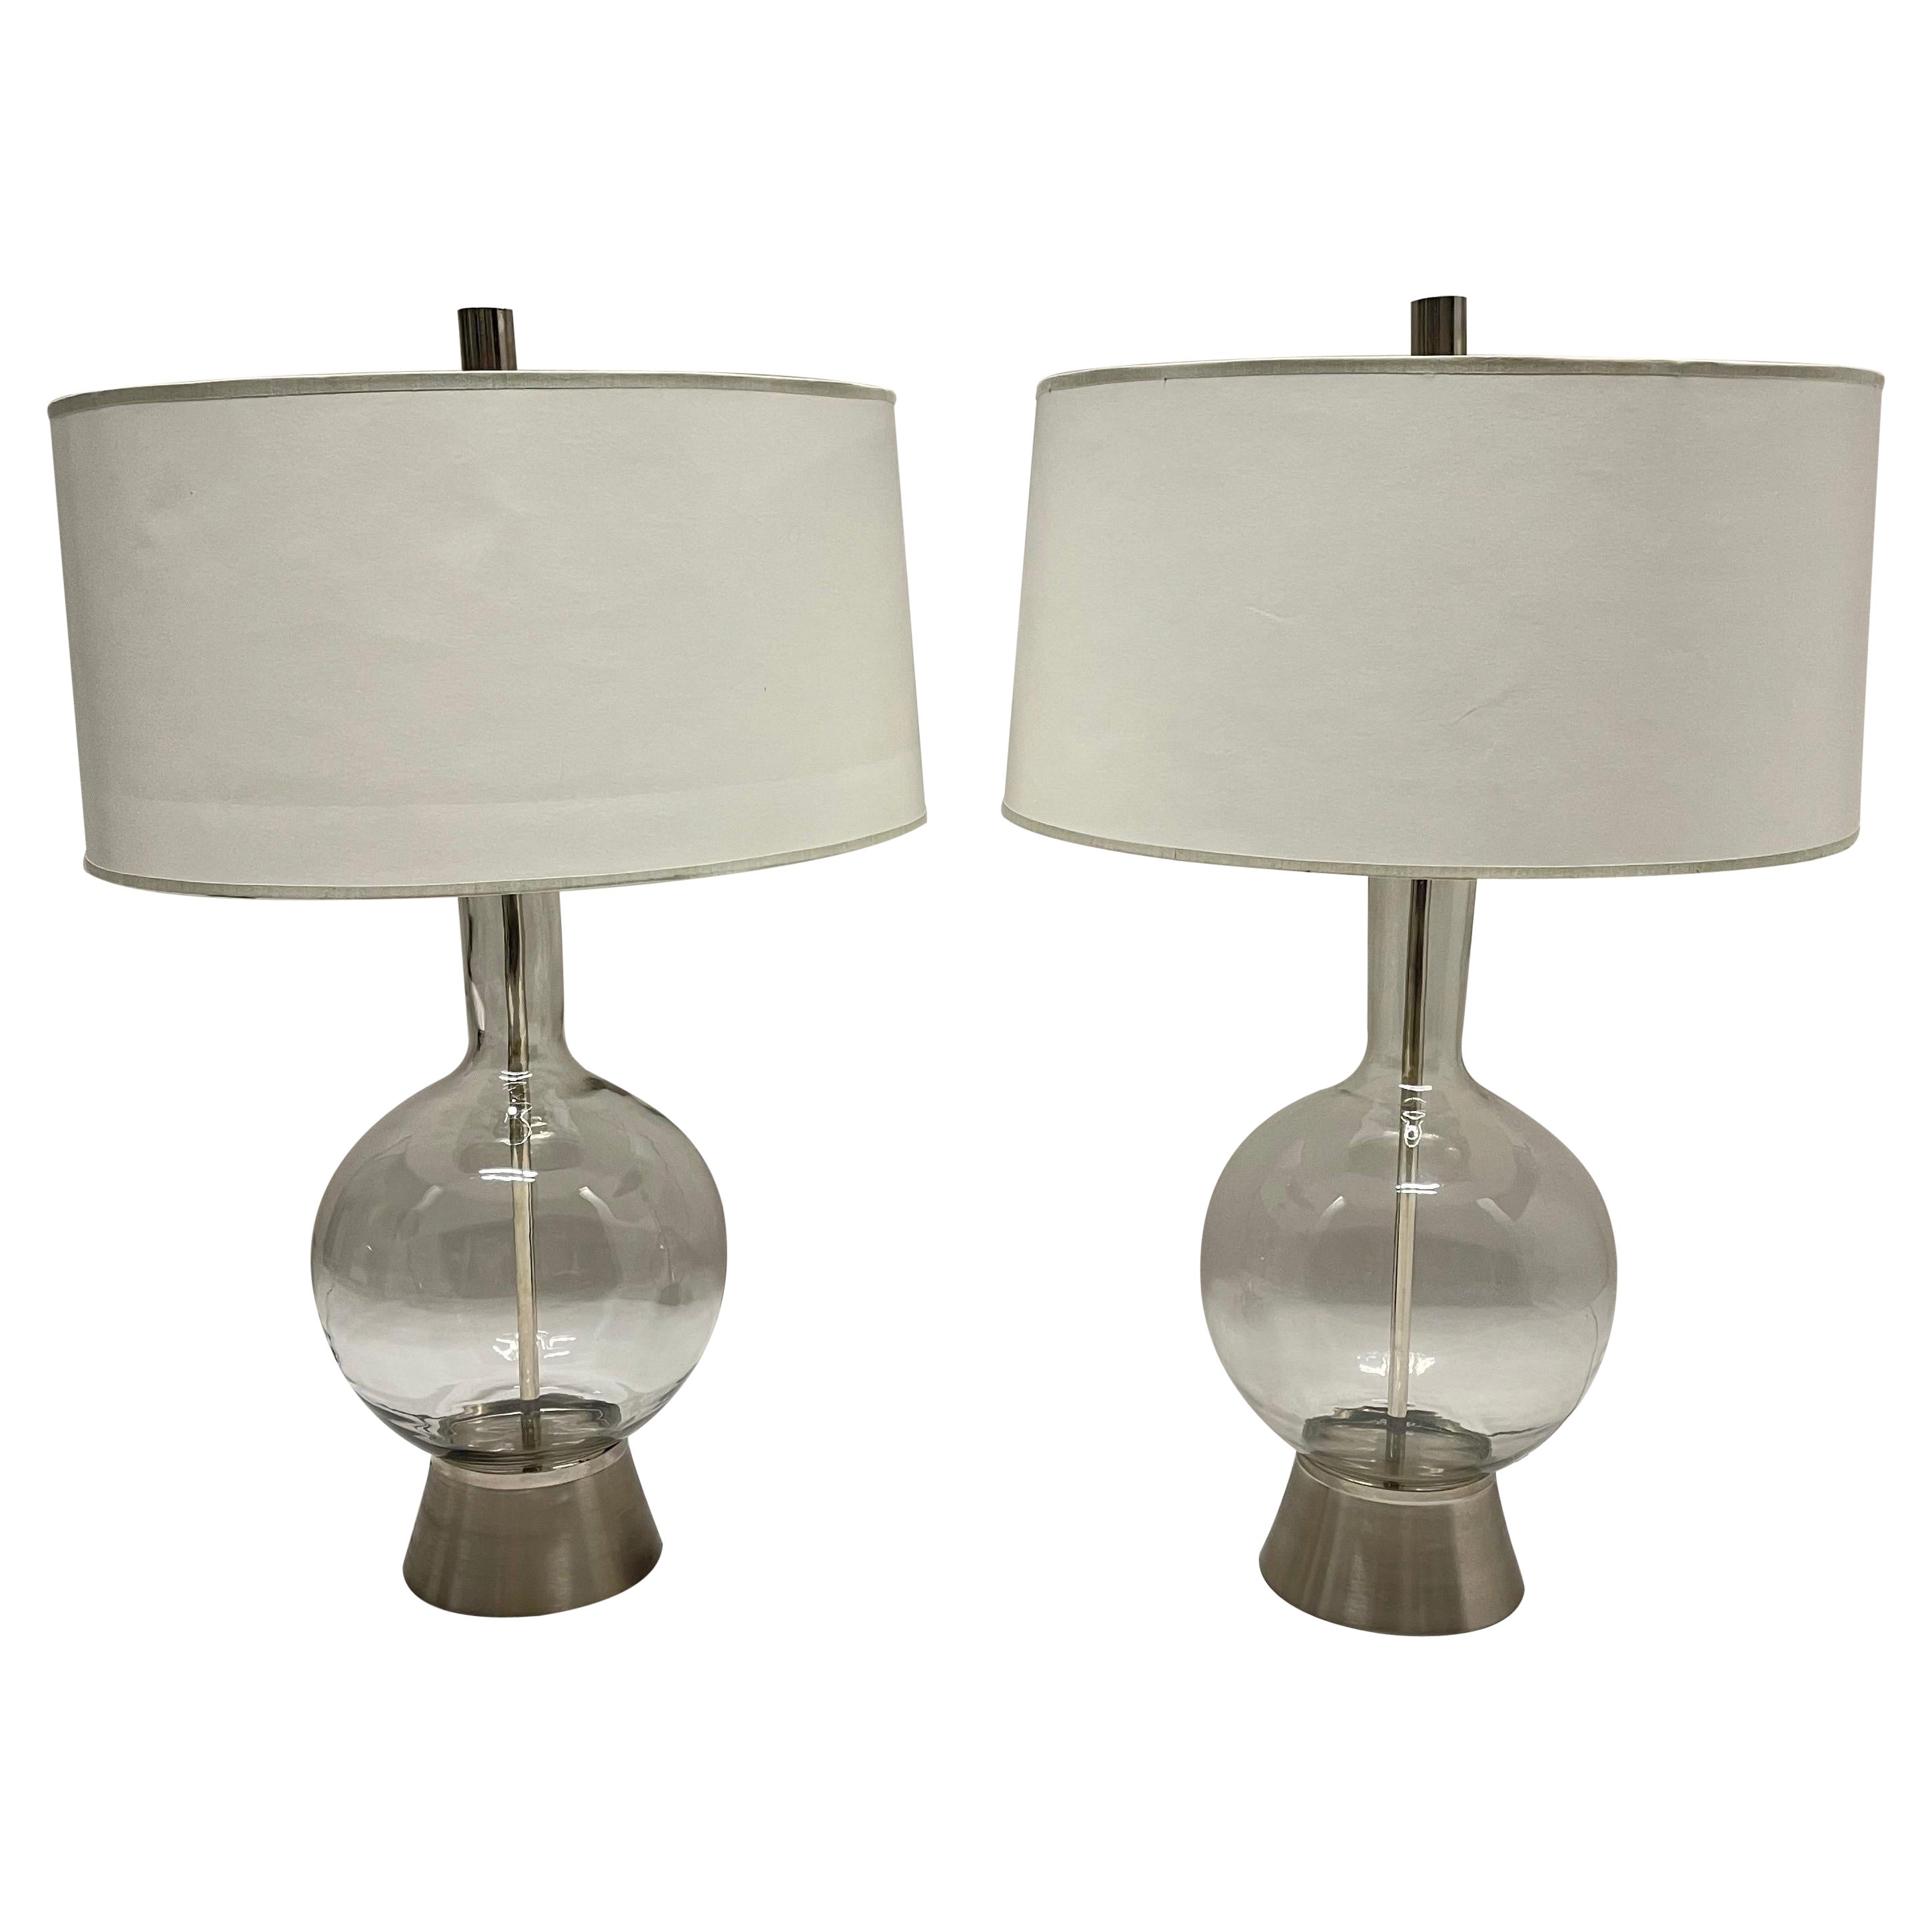 Pair of Mid-Century Mouth Blown Glass and Brushed Nickel Lamp with Paper Shades For Sale